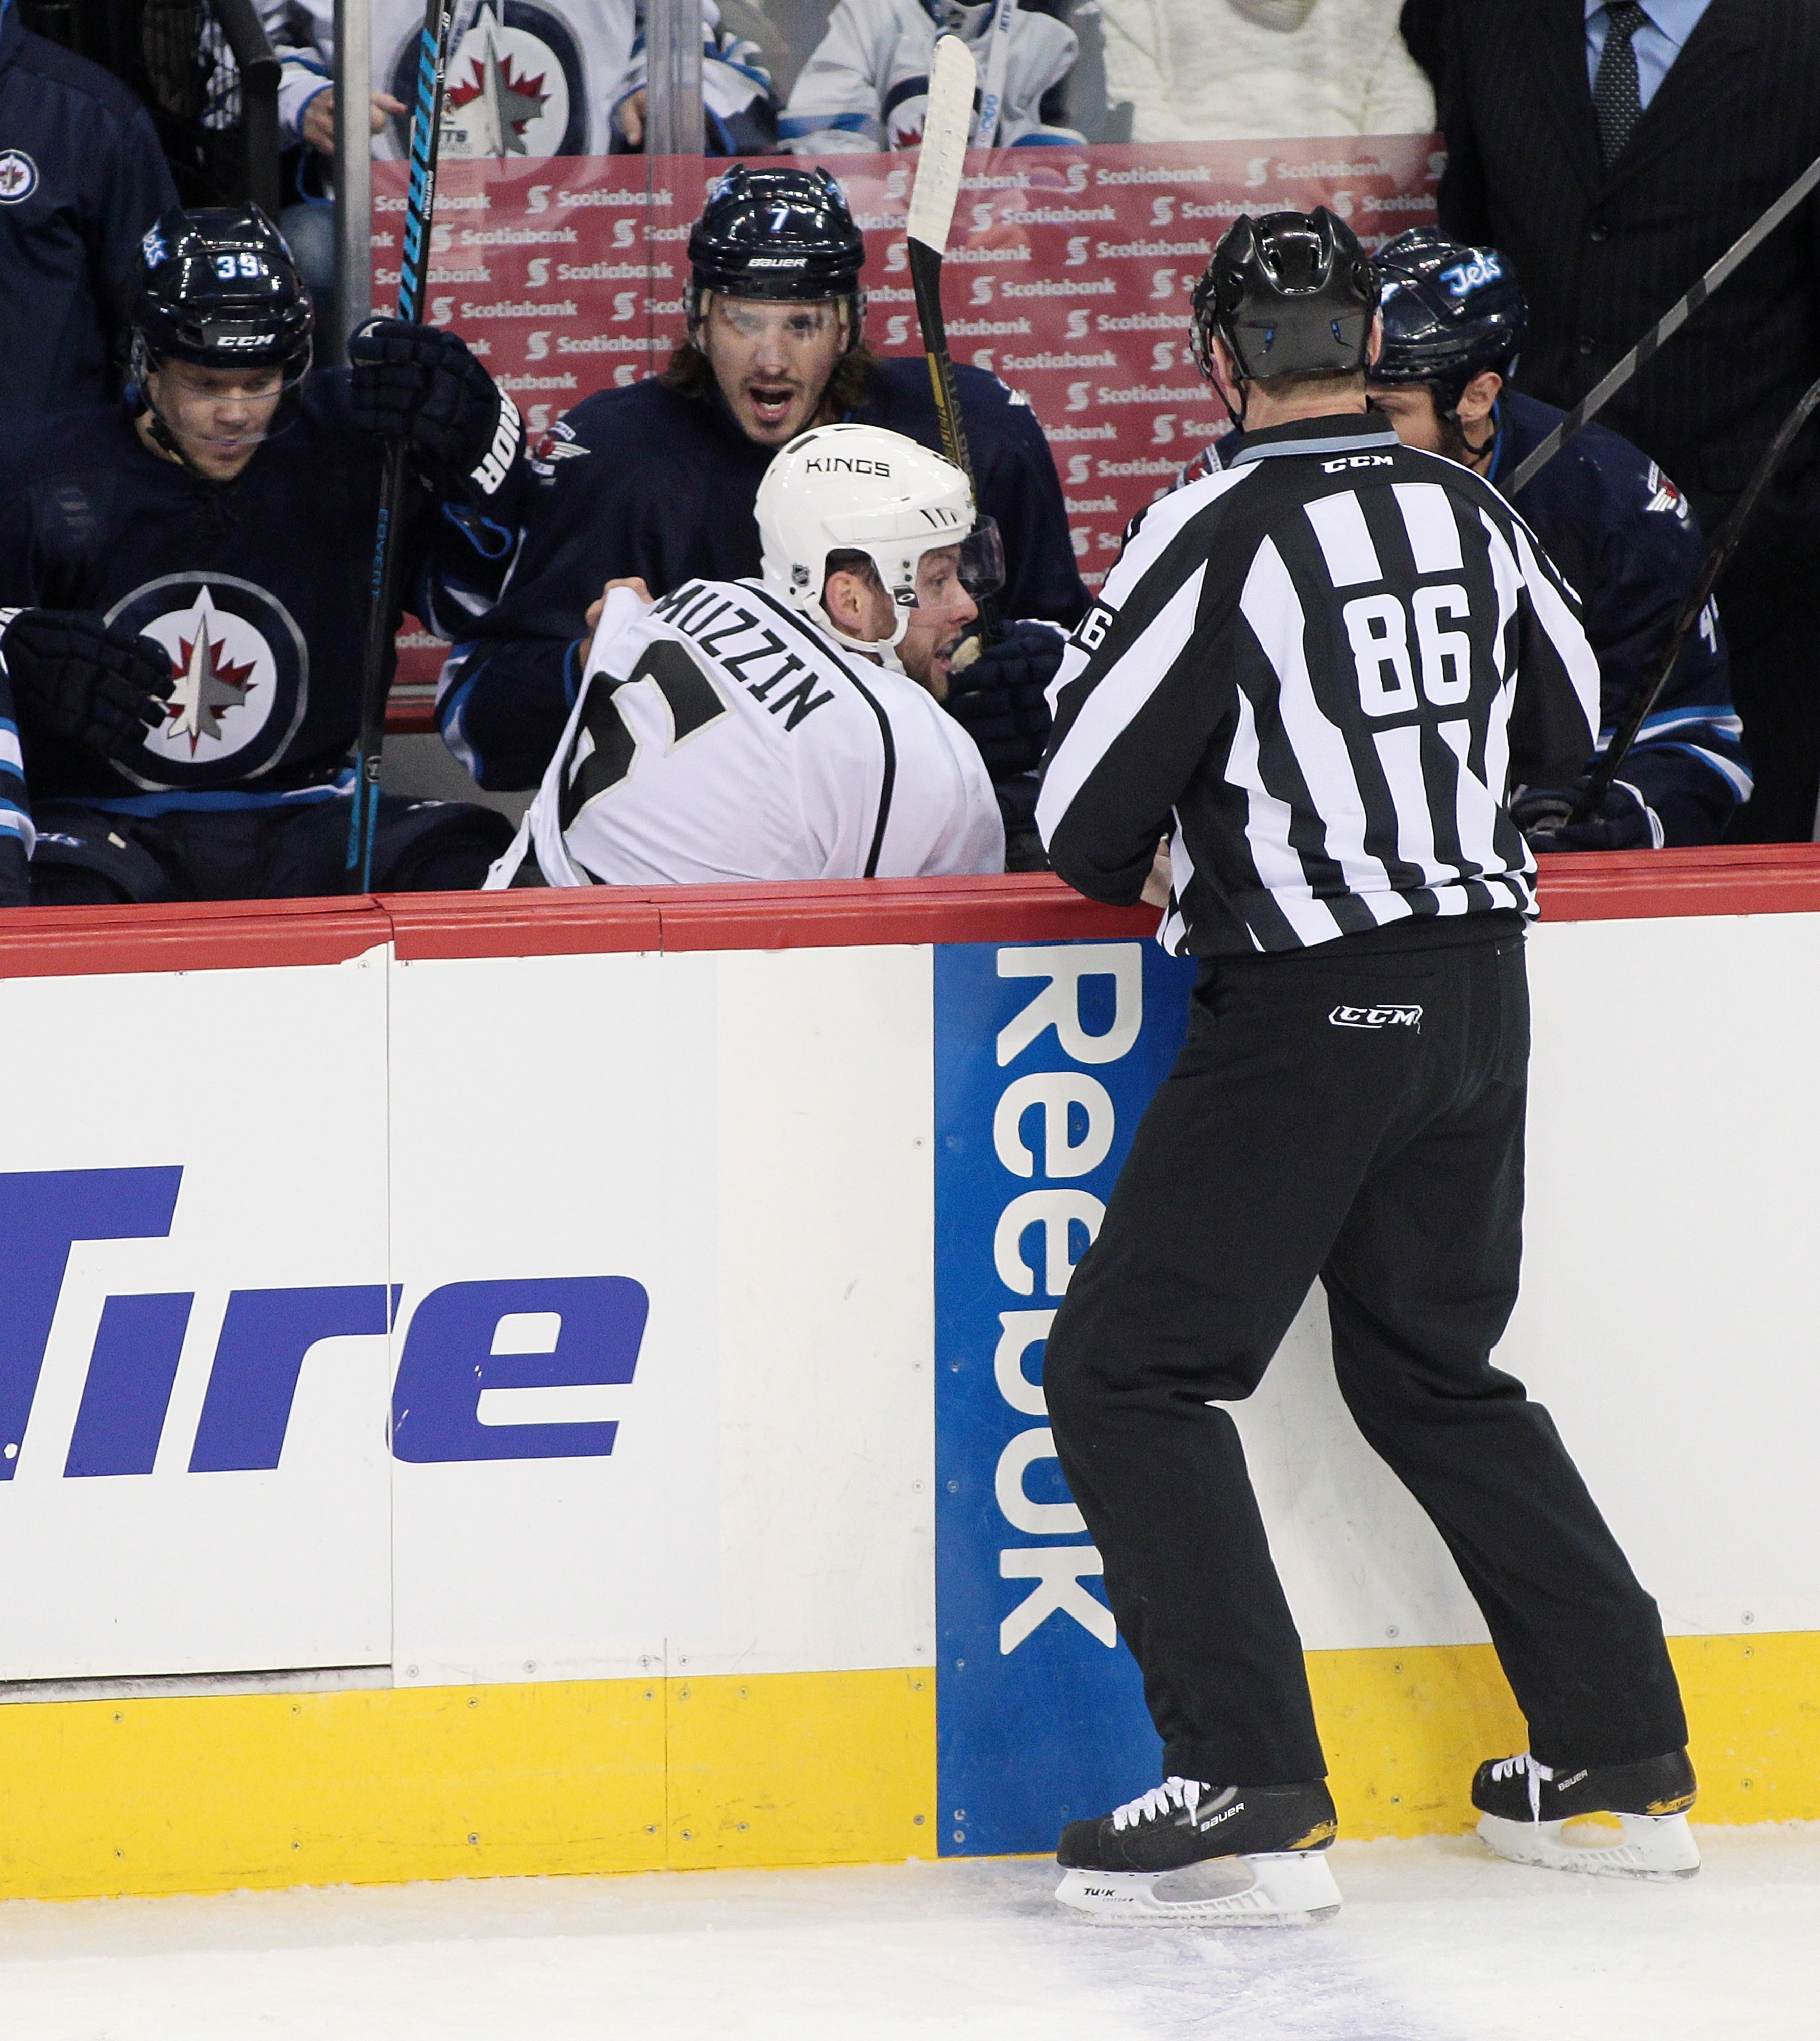 Unfortunately for Jake Muzzin, he tried to join the Jets the day after the trade deadline